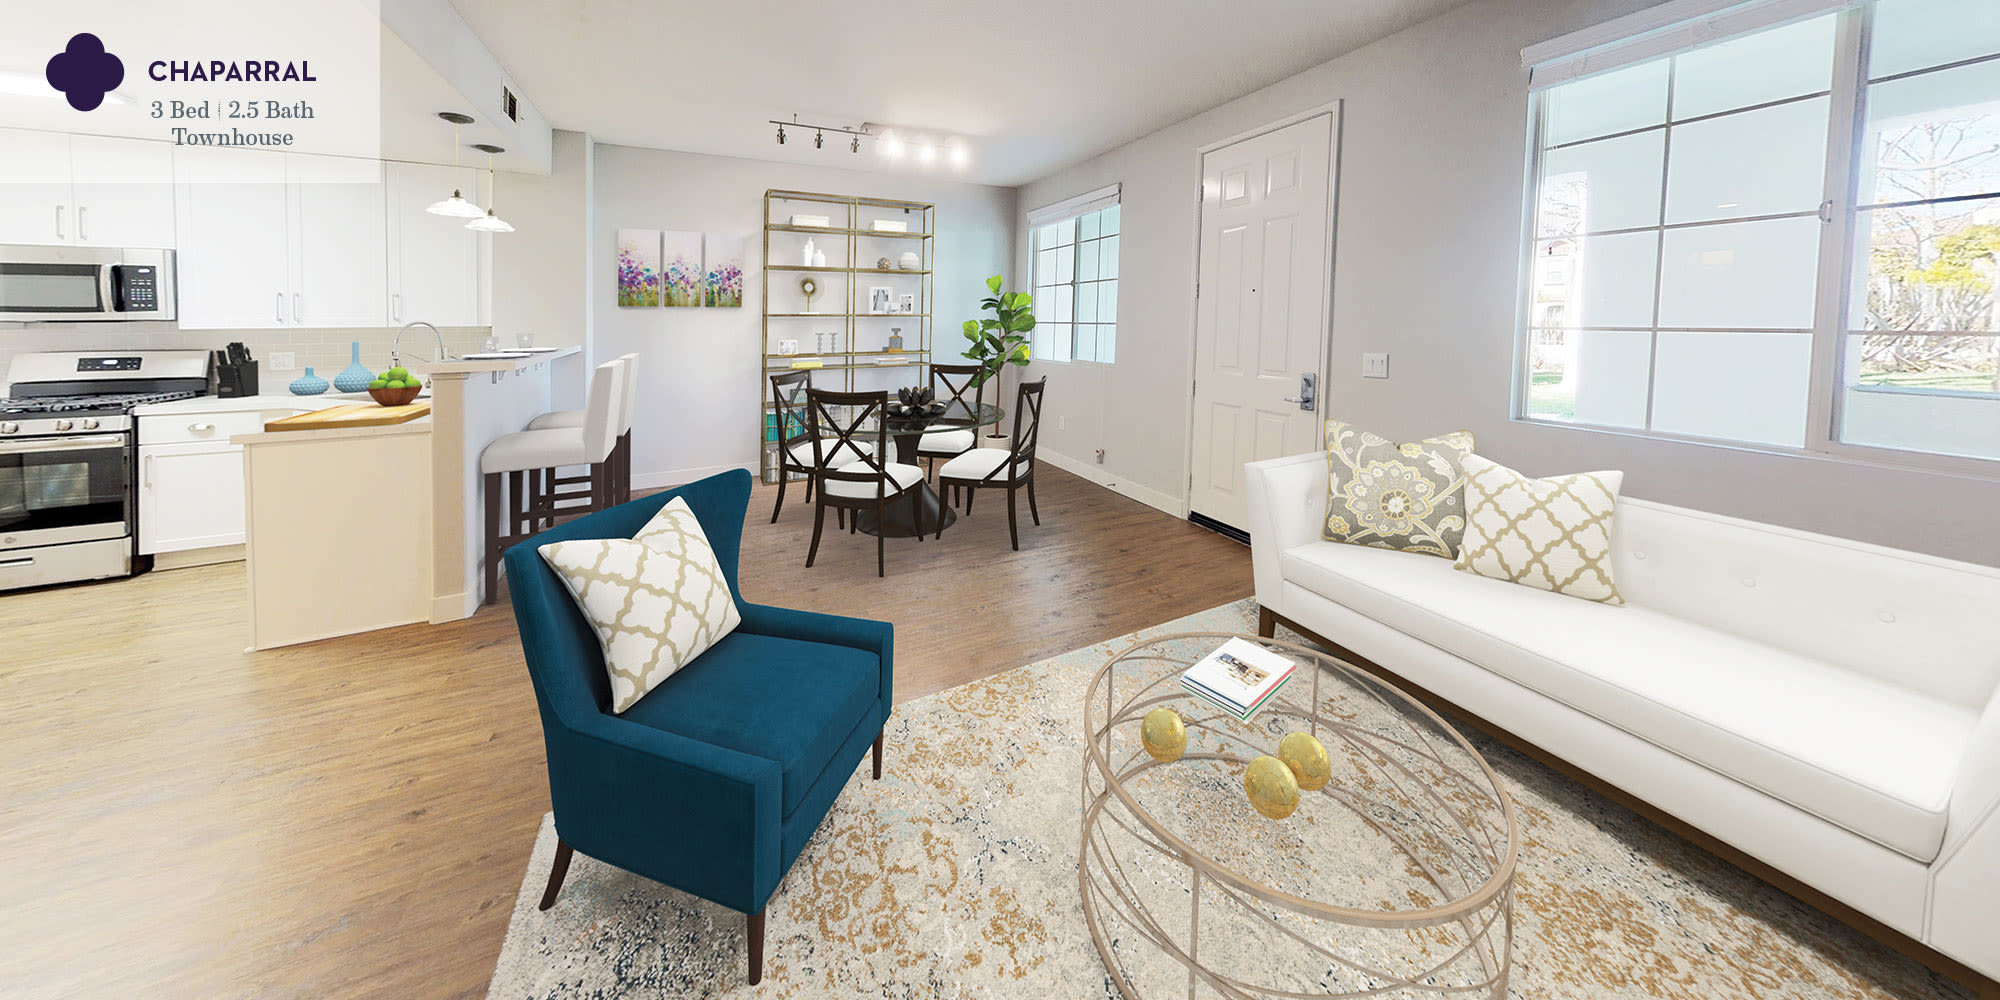 A well-furnished living area in a three-bedroom apartment townhome at Mission Hills in Camarillo, California